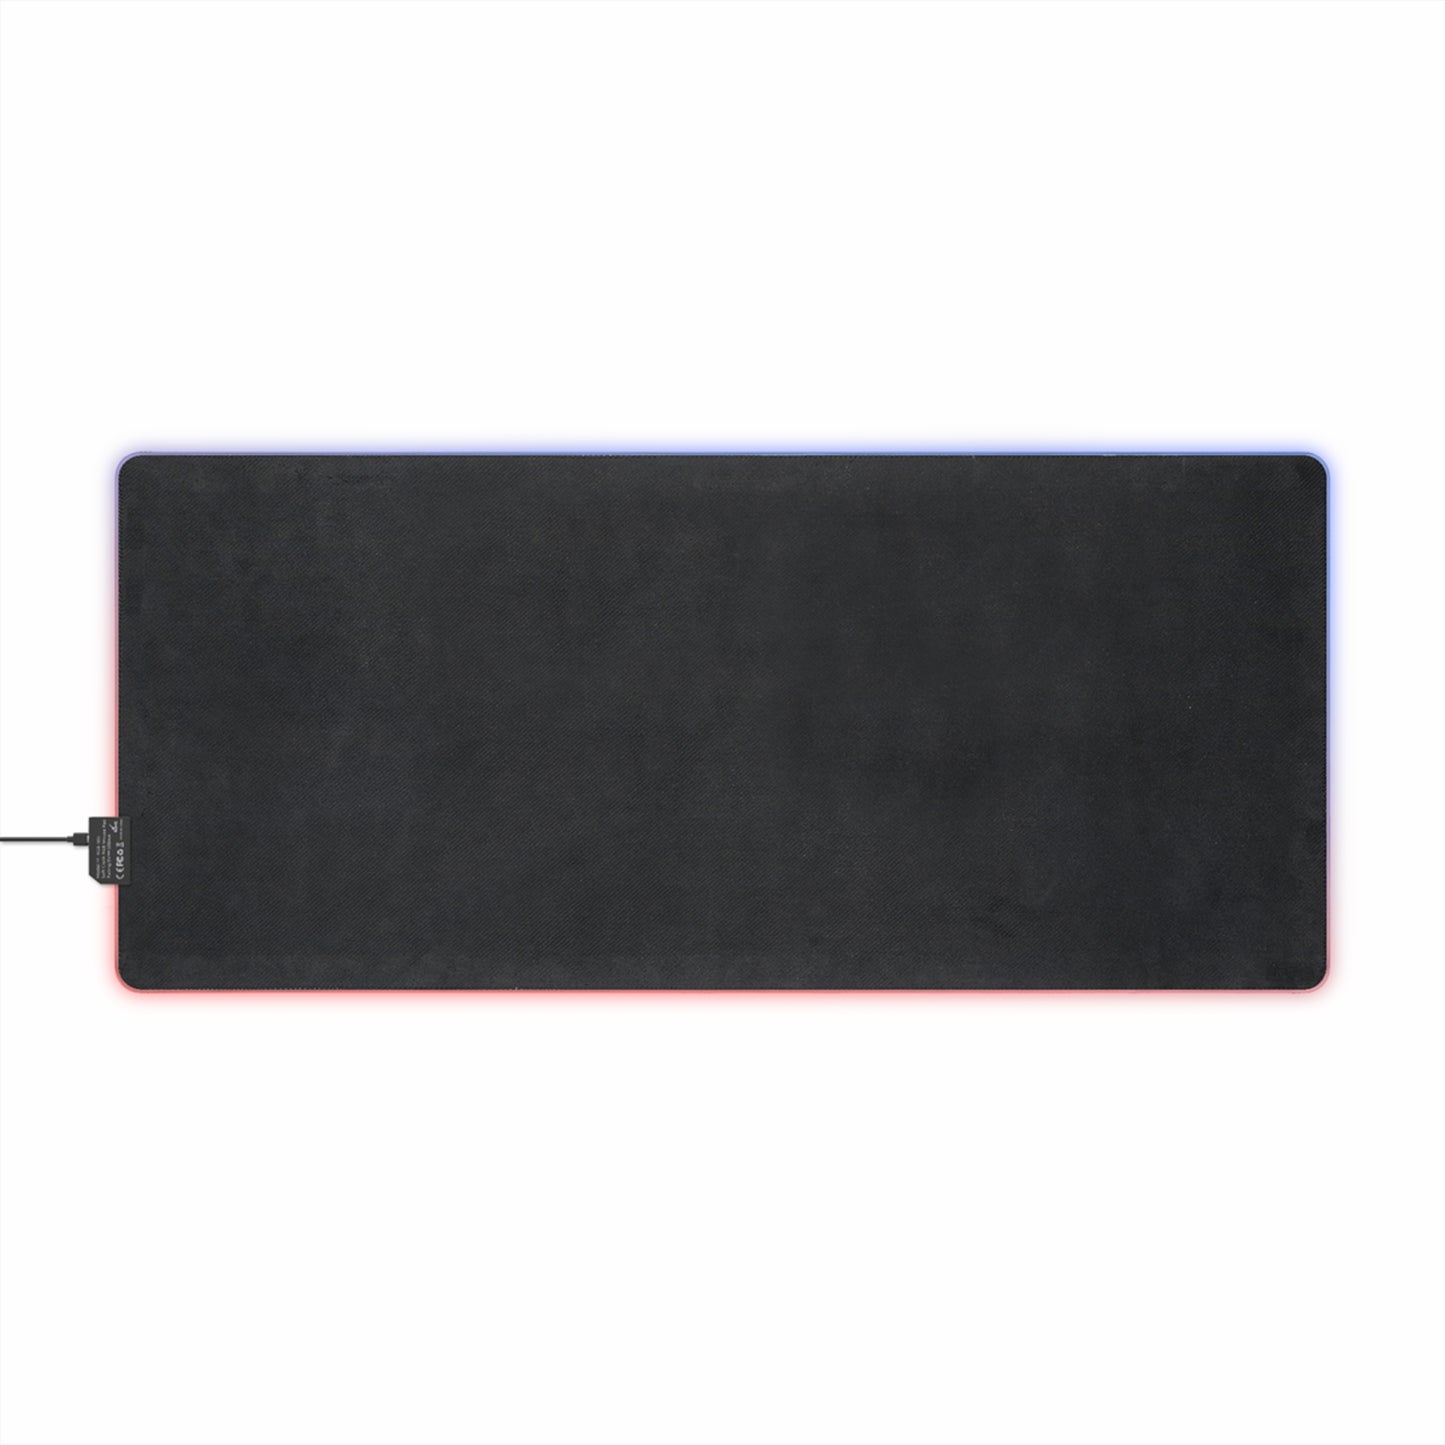 LCAM-30 LED Gaming Mouse Pad